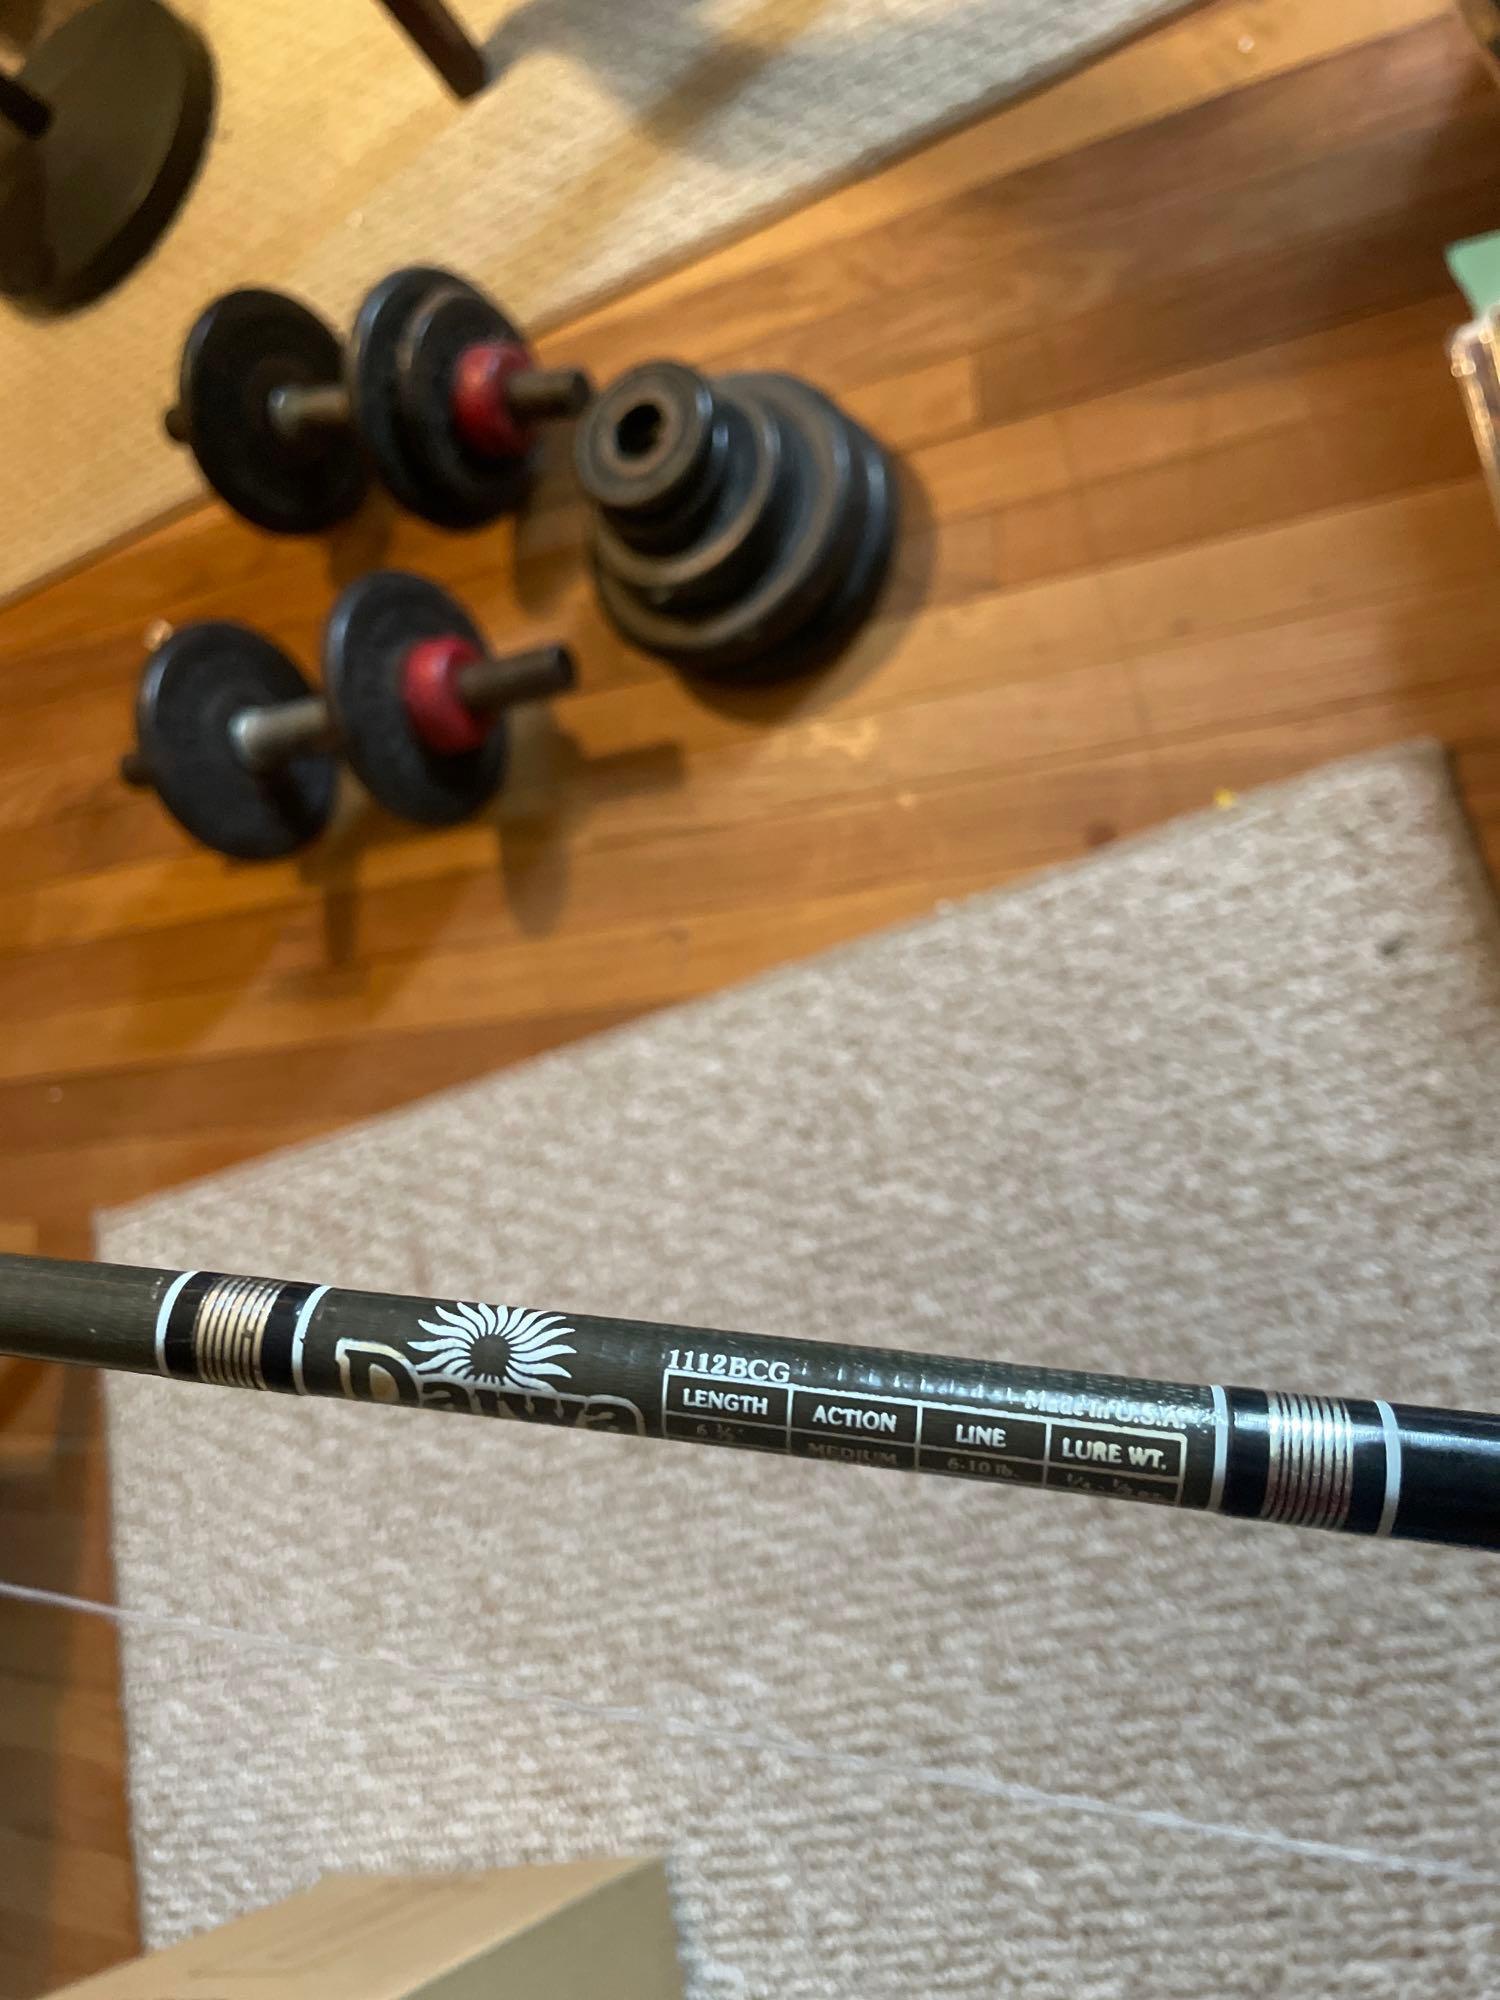 Barbells, Weights and Fishing Pole